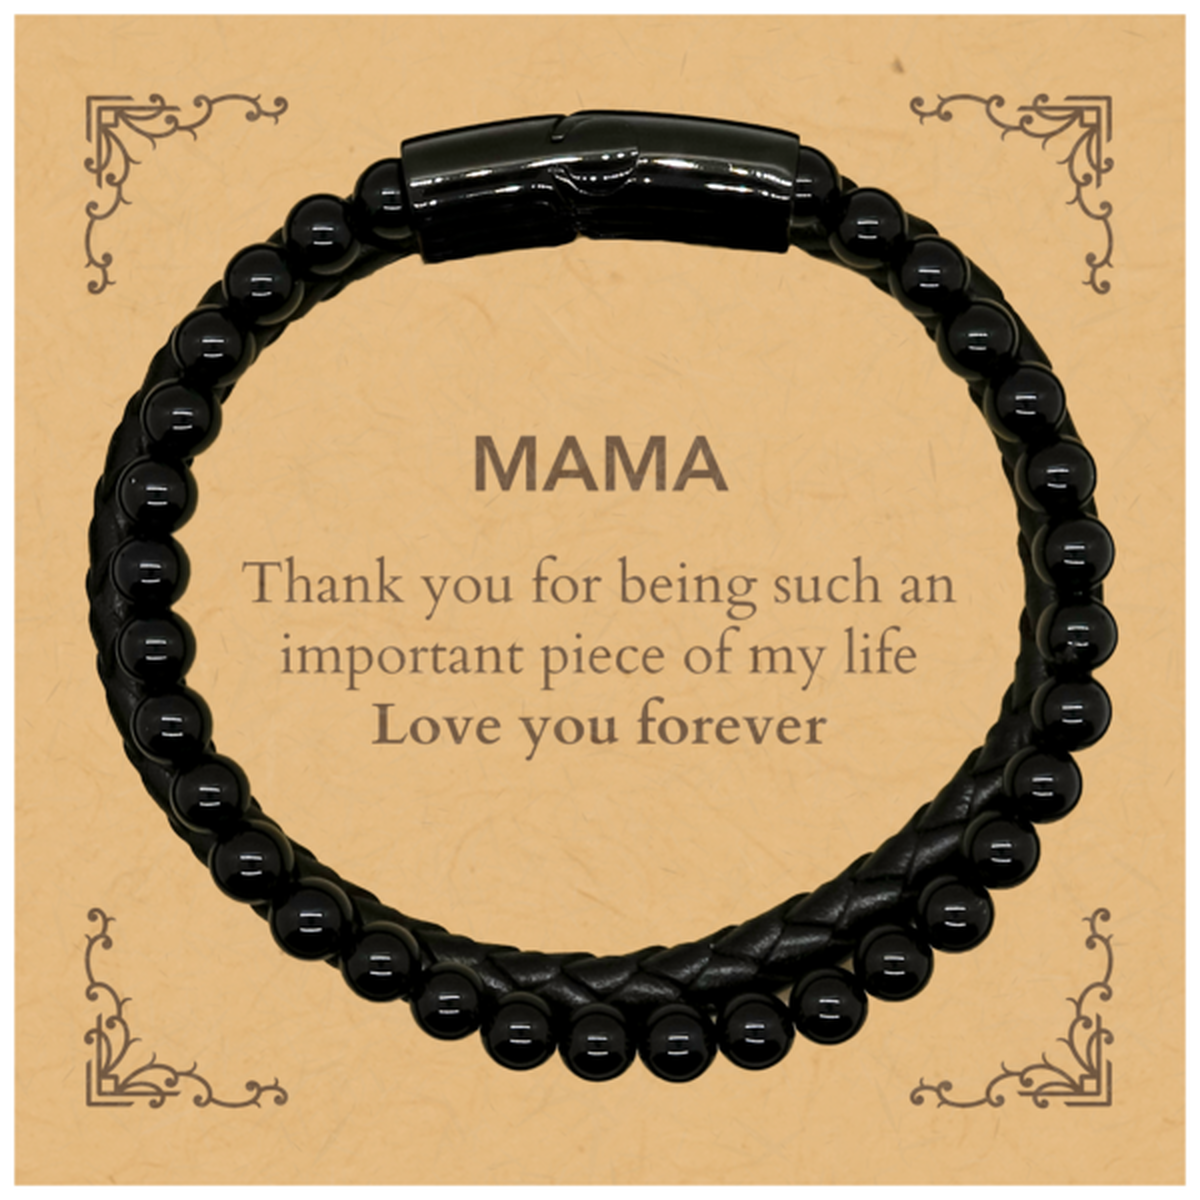 Appropriate Mama Stone Leather Bracelets Epic Birthday Gifts for Mama Thank you for being such an important piece of my life Mama Christmas Mothers Fathers Day